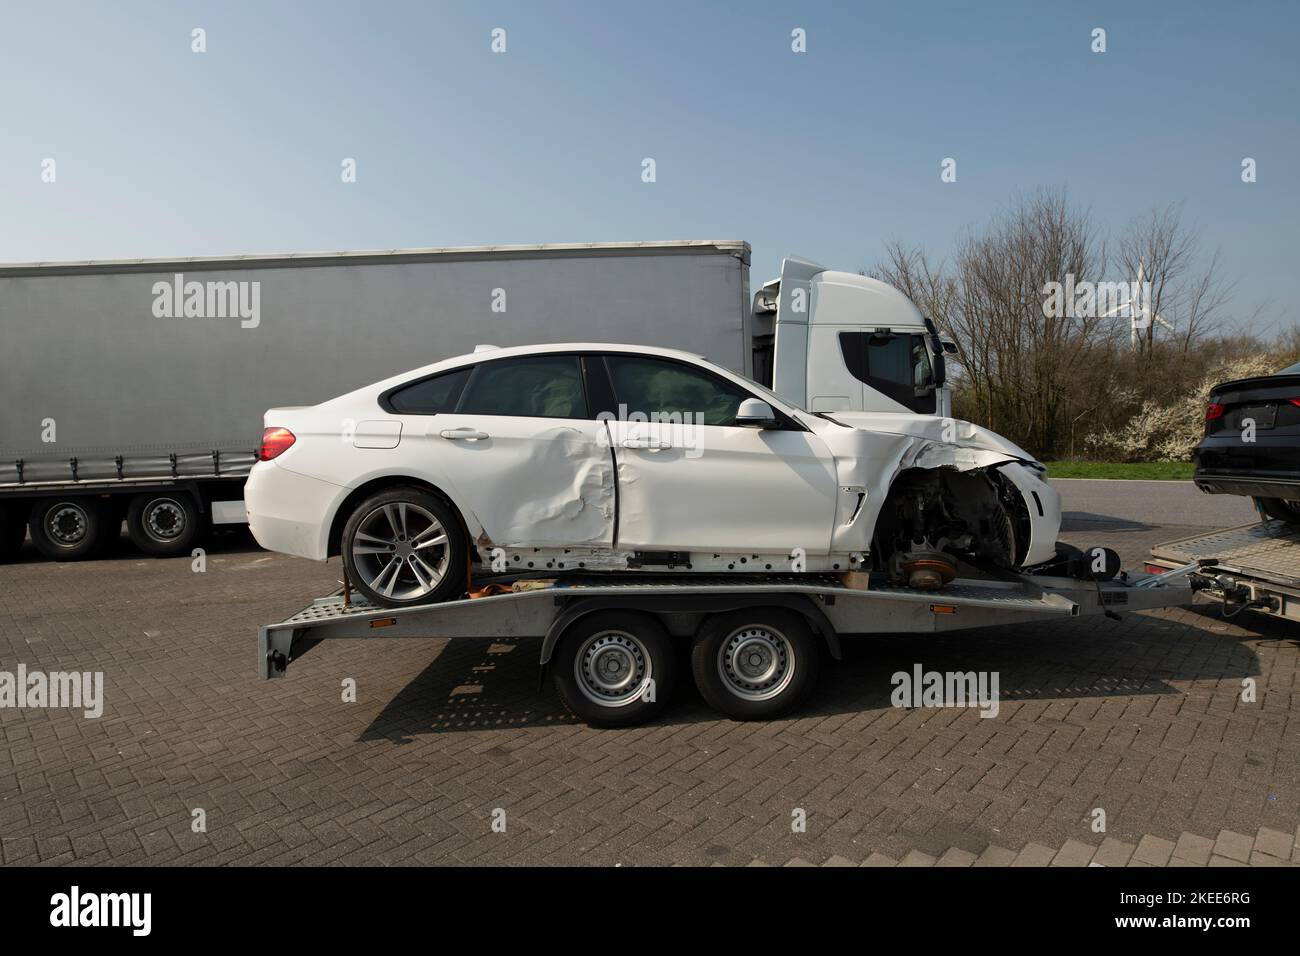 An accident vehicle on a trailer Stock Photo